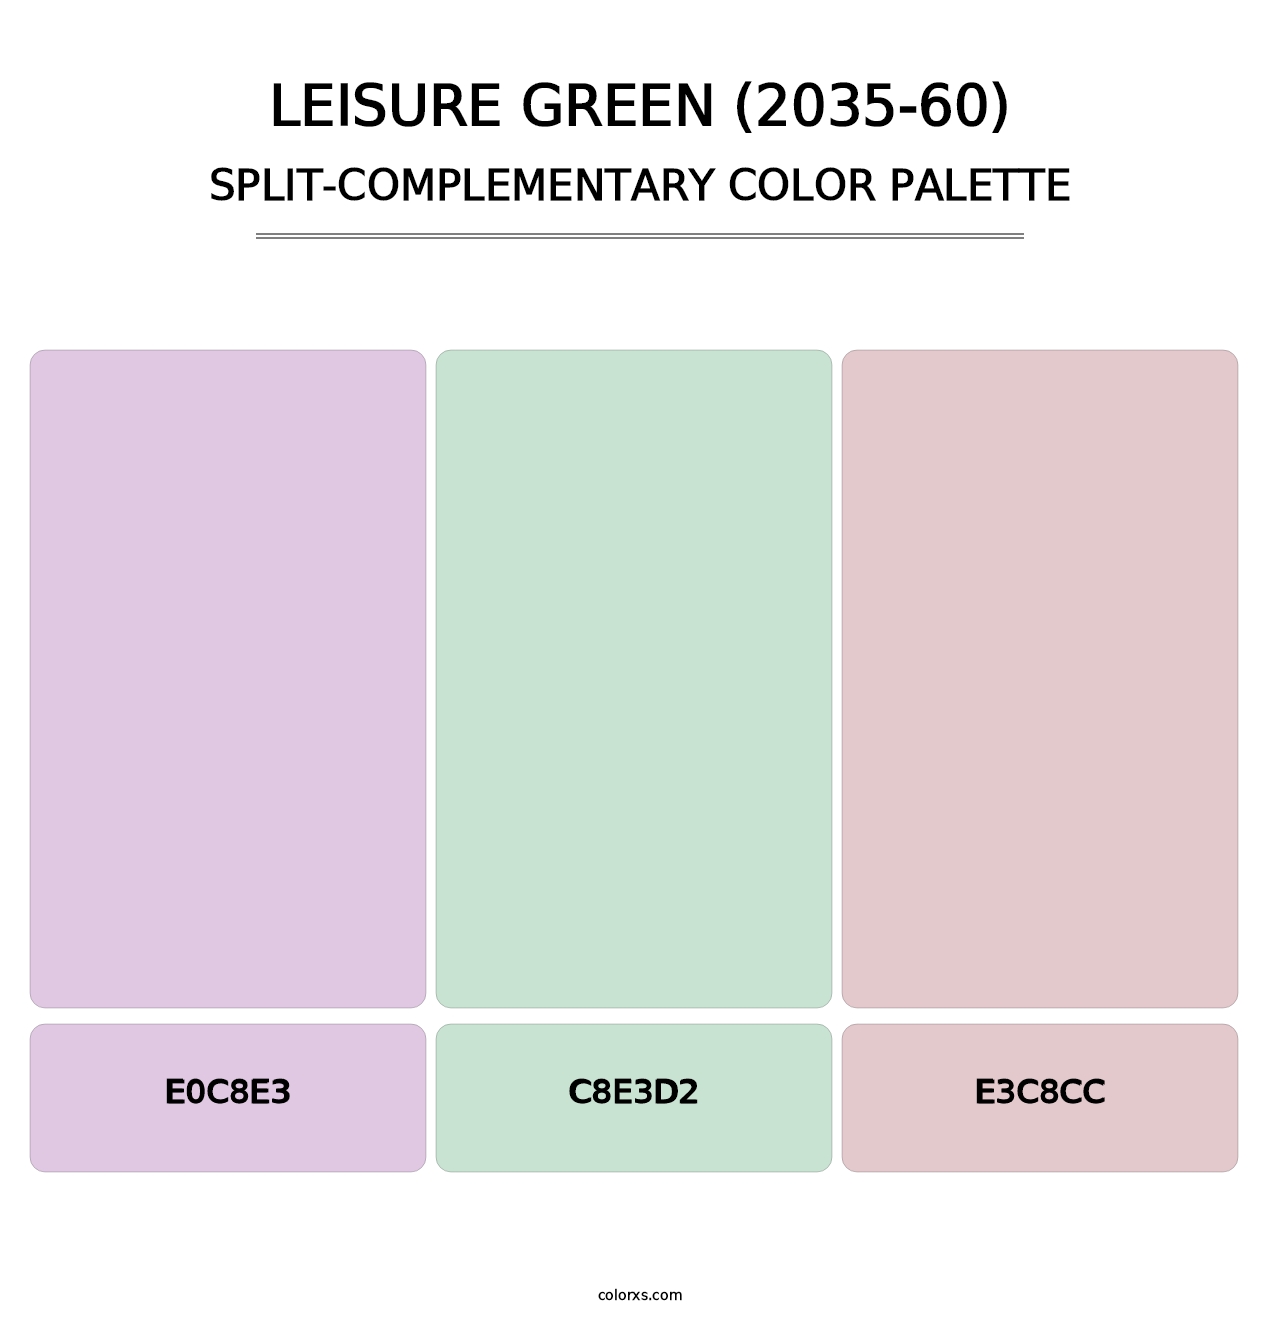 Leisure Green (2035-60) - Split-Complementary Color Palette